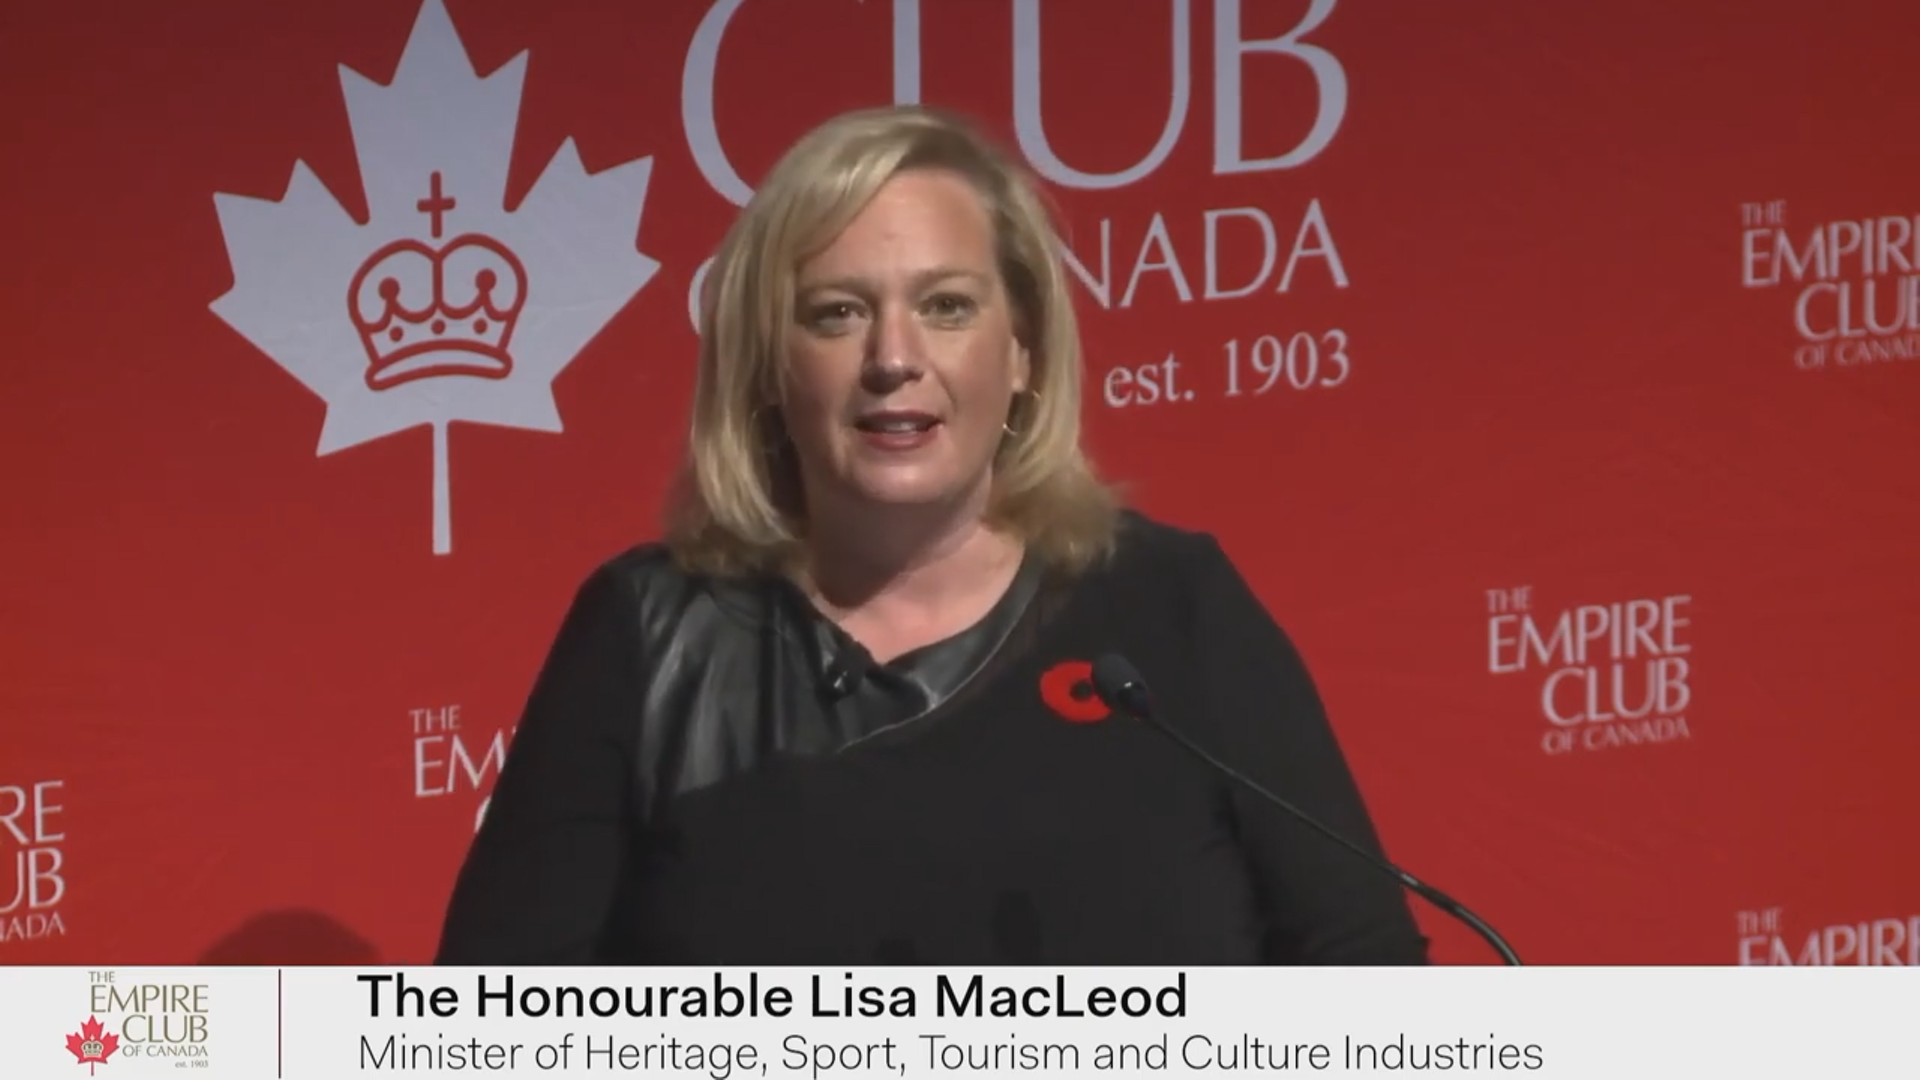 The Honourable Lisa MacLeod speaking at a virtual event